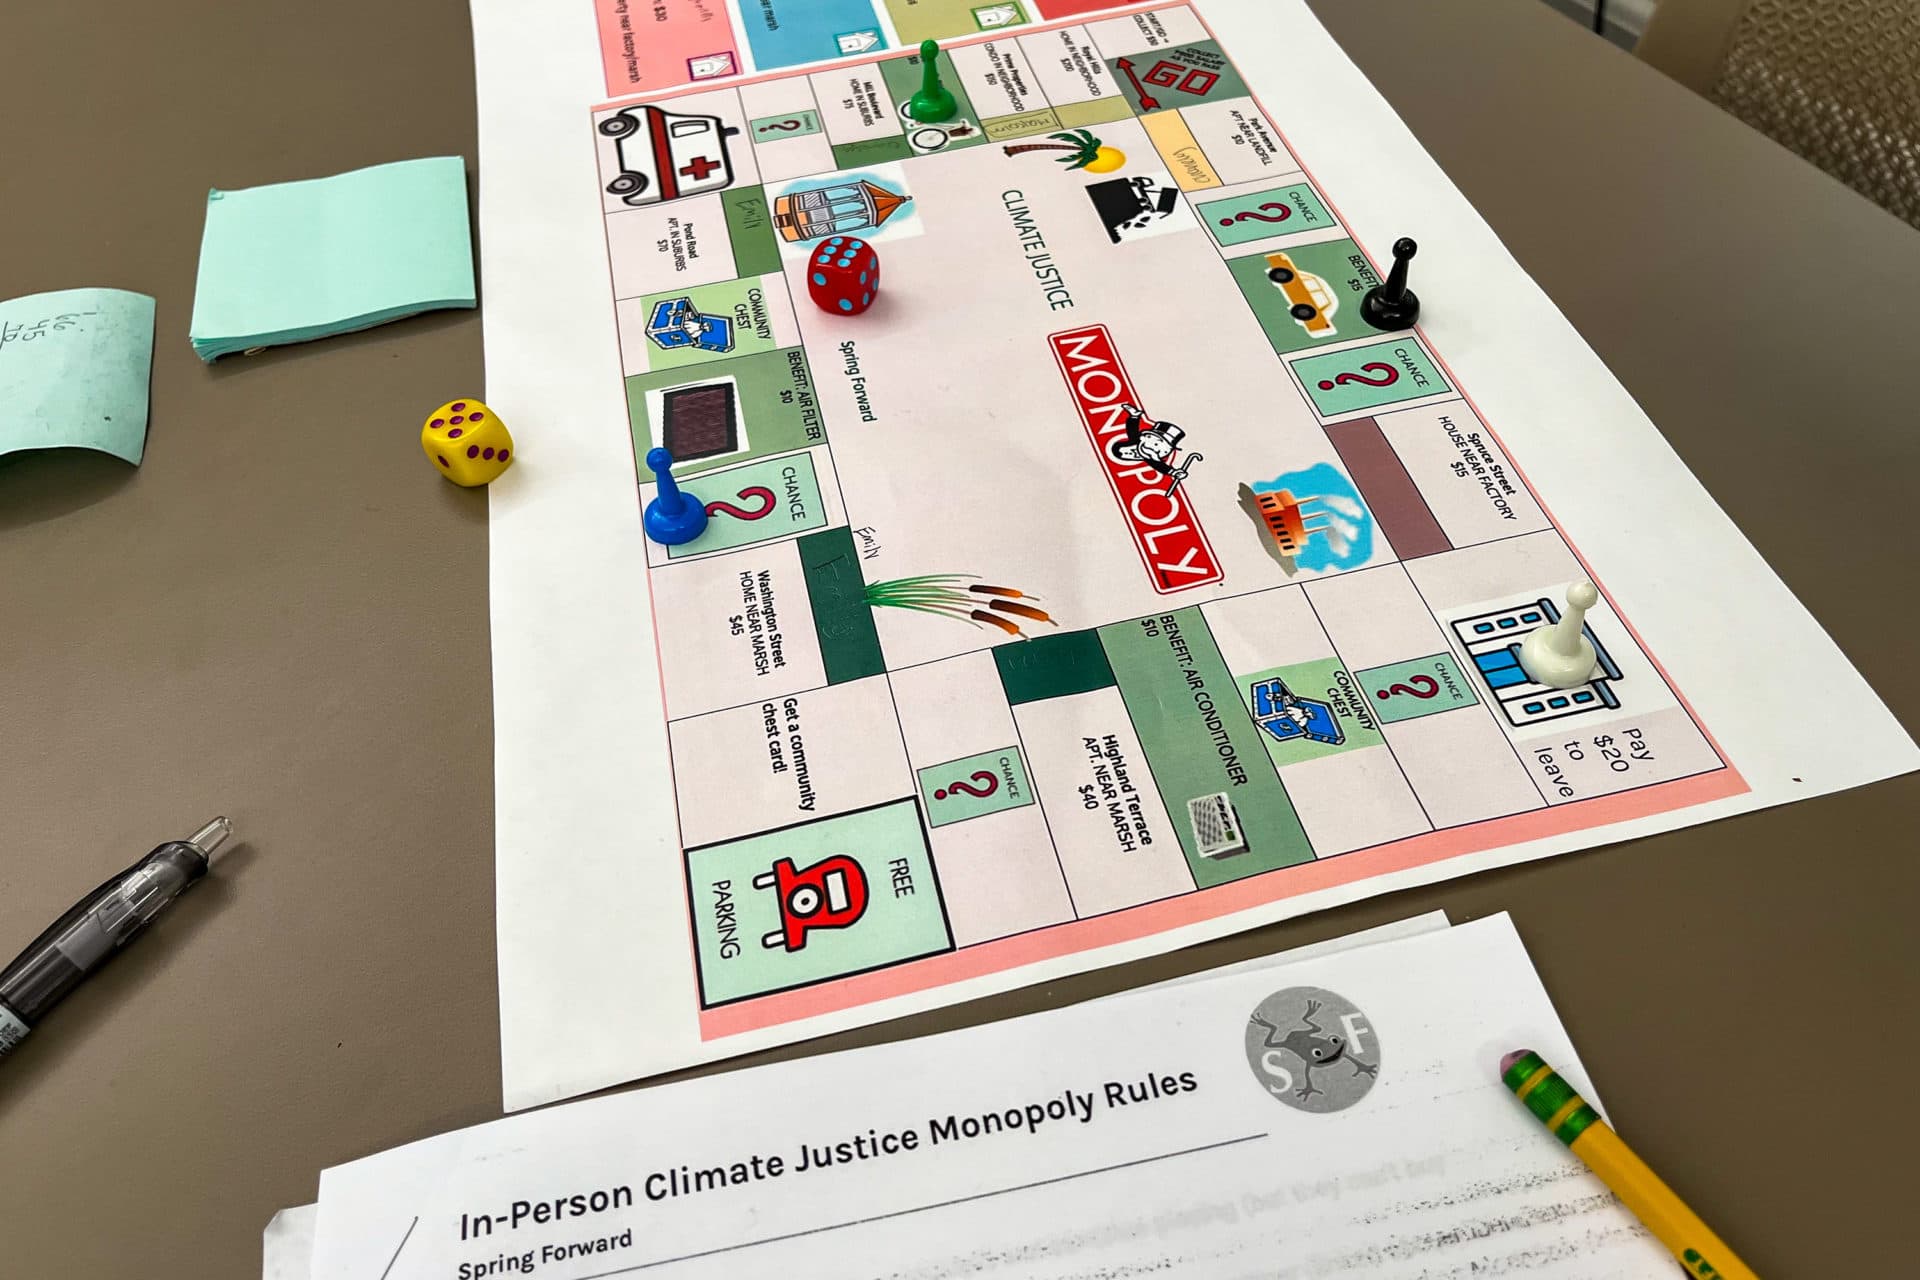 Spring Forward's board game 'Climate Justice Monopoly' teaches students about the financial consequences of climate change. (Aimee Moon/WBUR)